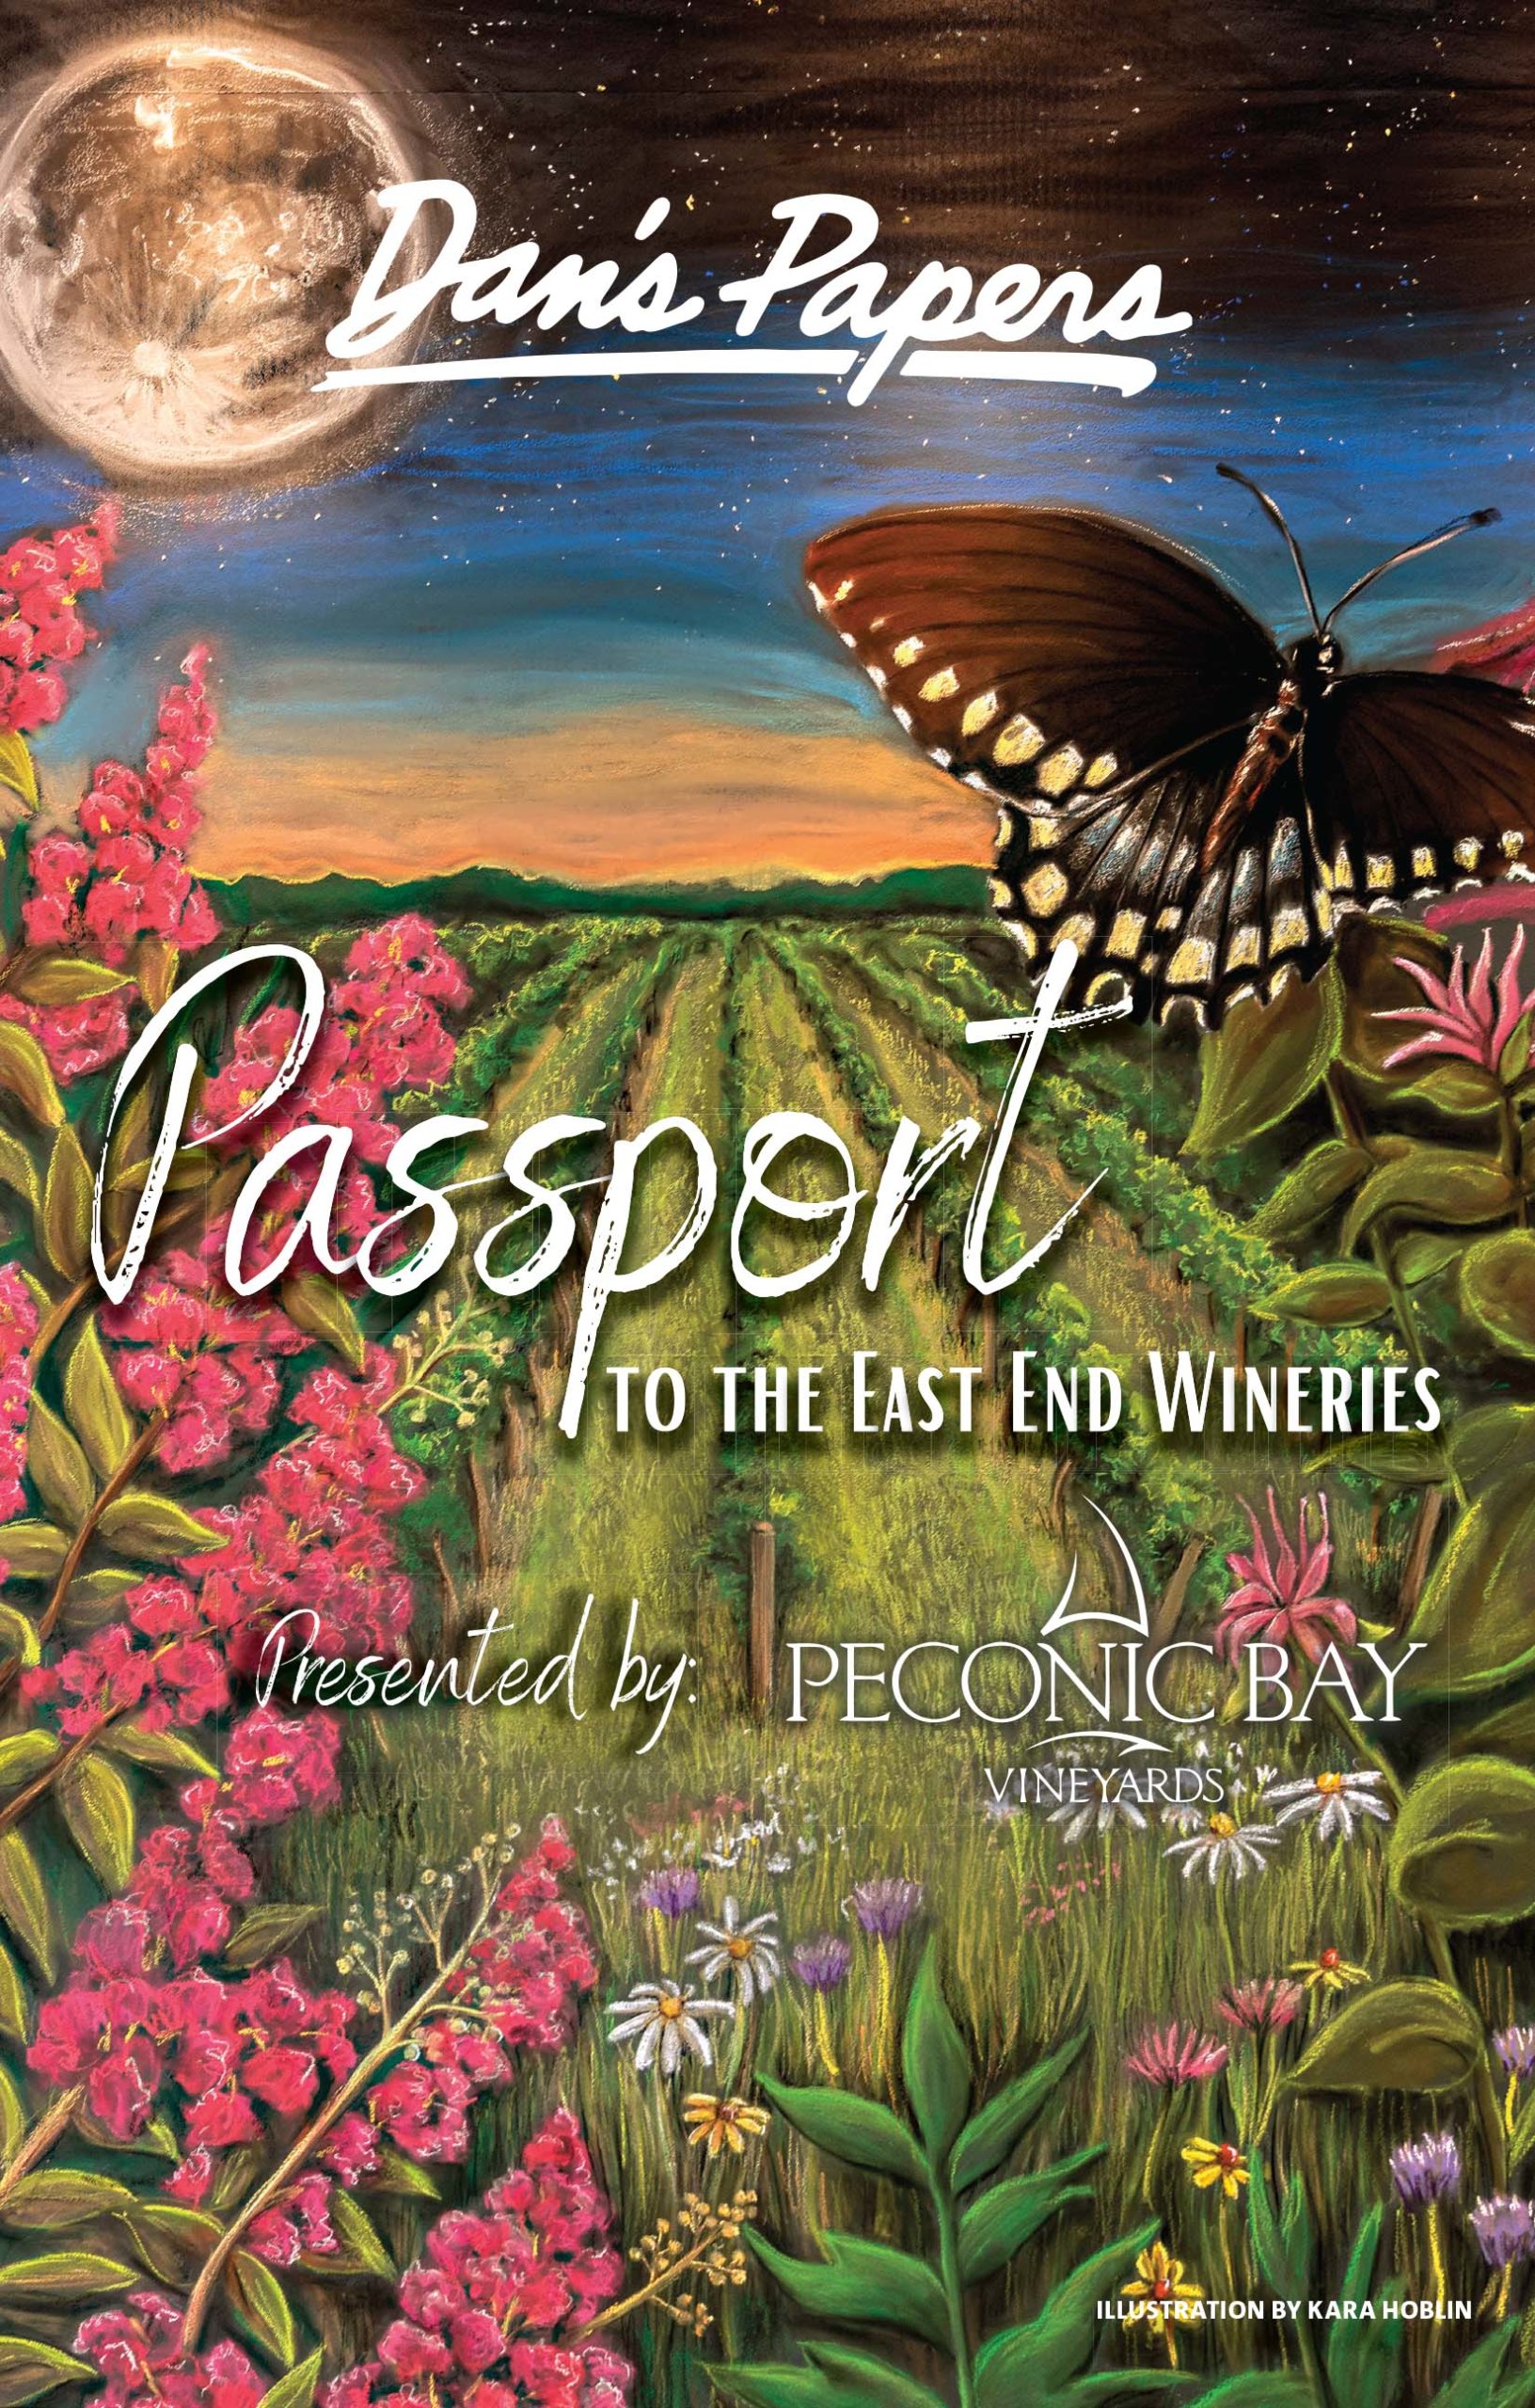 Dan's Papers 2022 Passport to East End Wineries Presented by Peconic Bay Vineyards